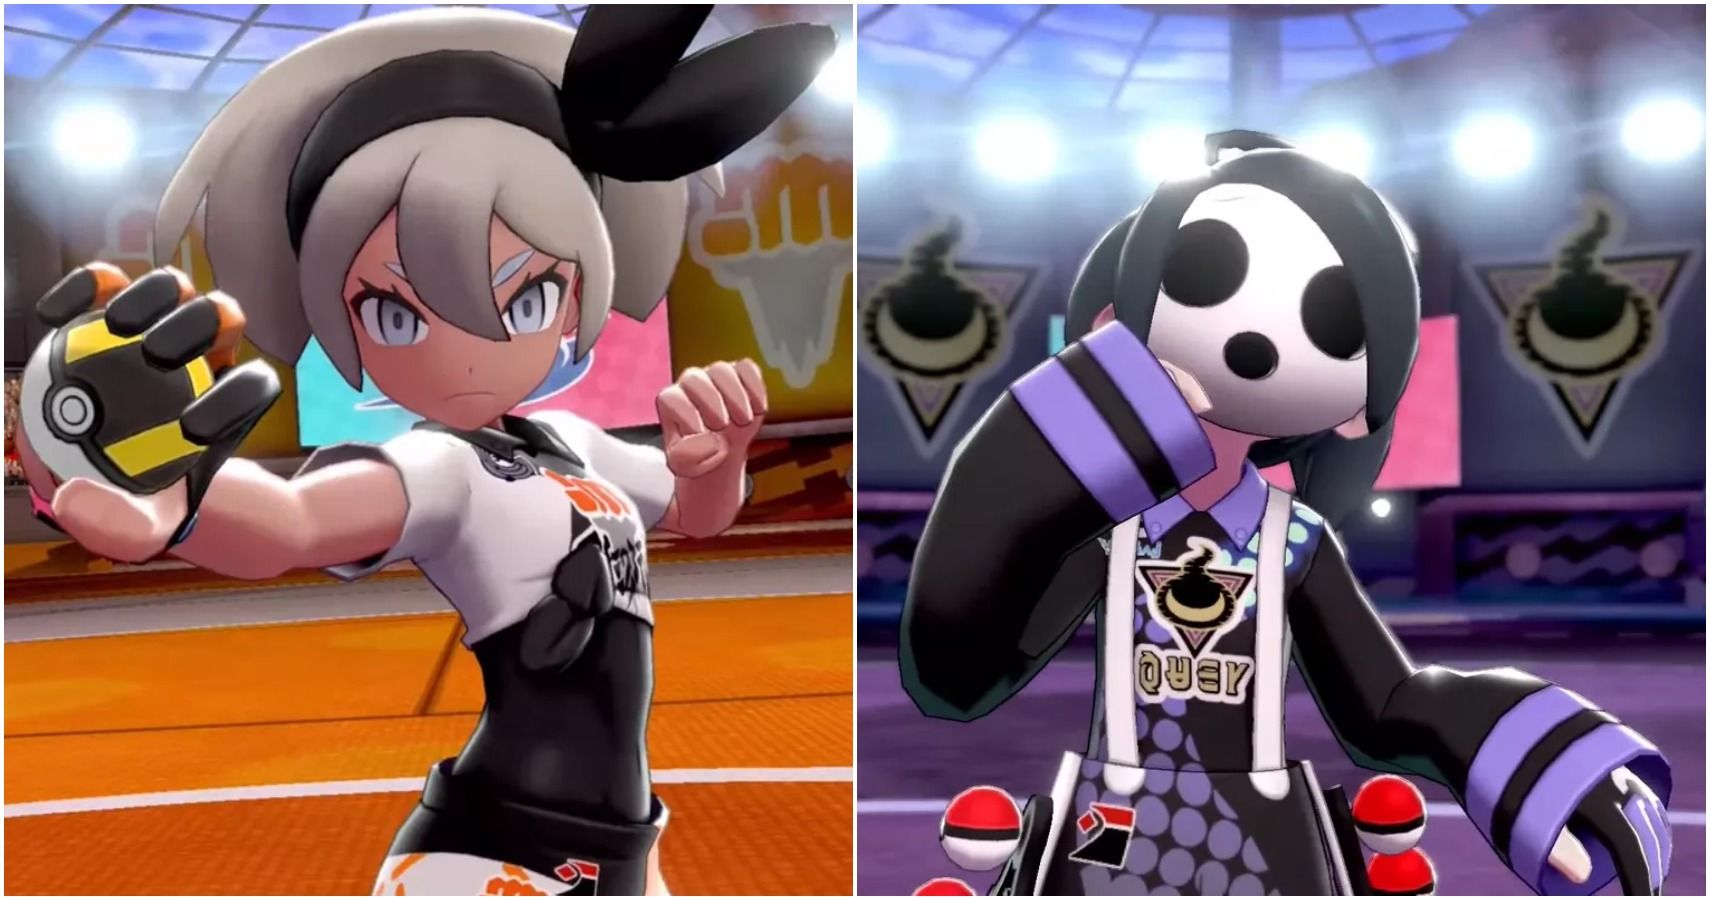 Allister has already made a big impression on Pokemon Sword and